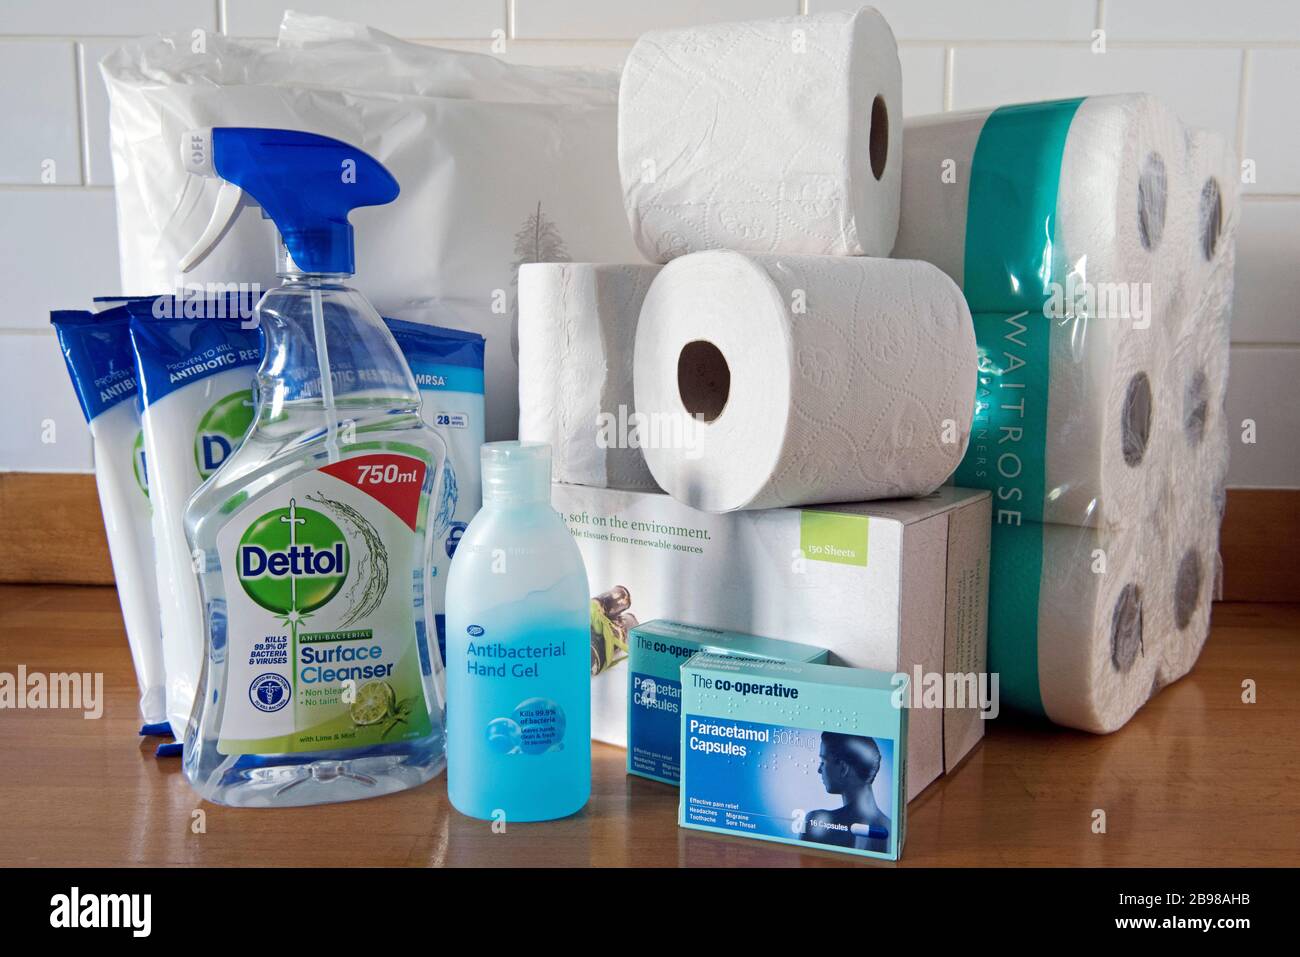 Antibacterial hand gel Dettol spray and surface wipes to combat coronavirus. Toilet rolls behind and Paracetamol Capsules. Covid-19 epidemic pandemic Stock Photo